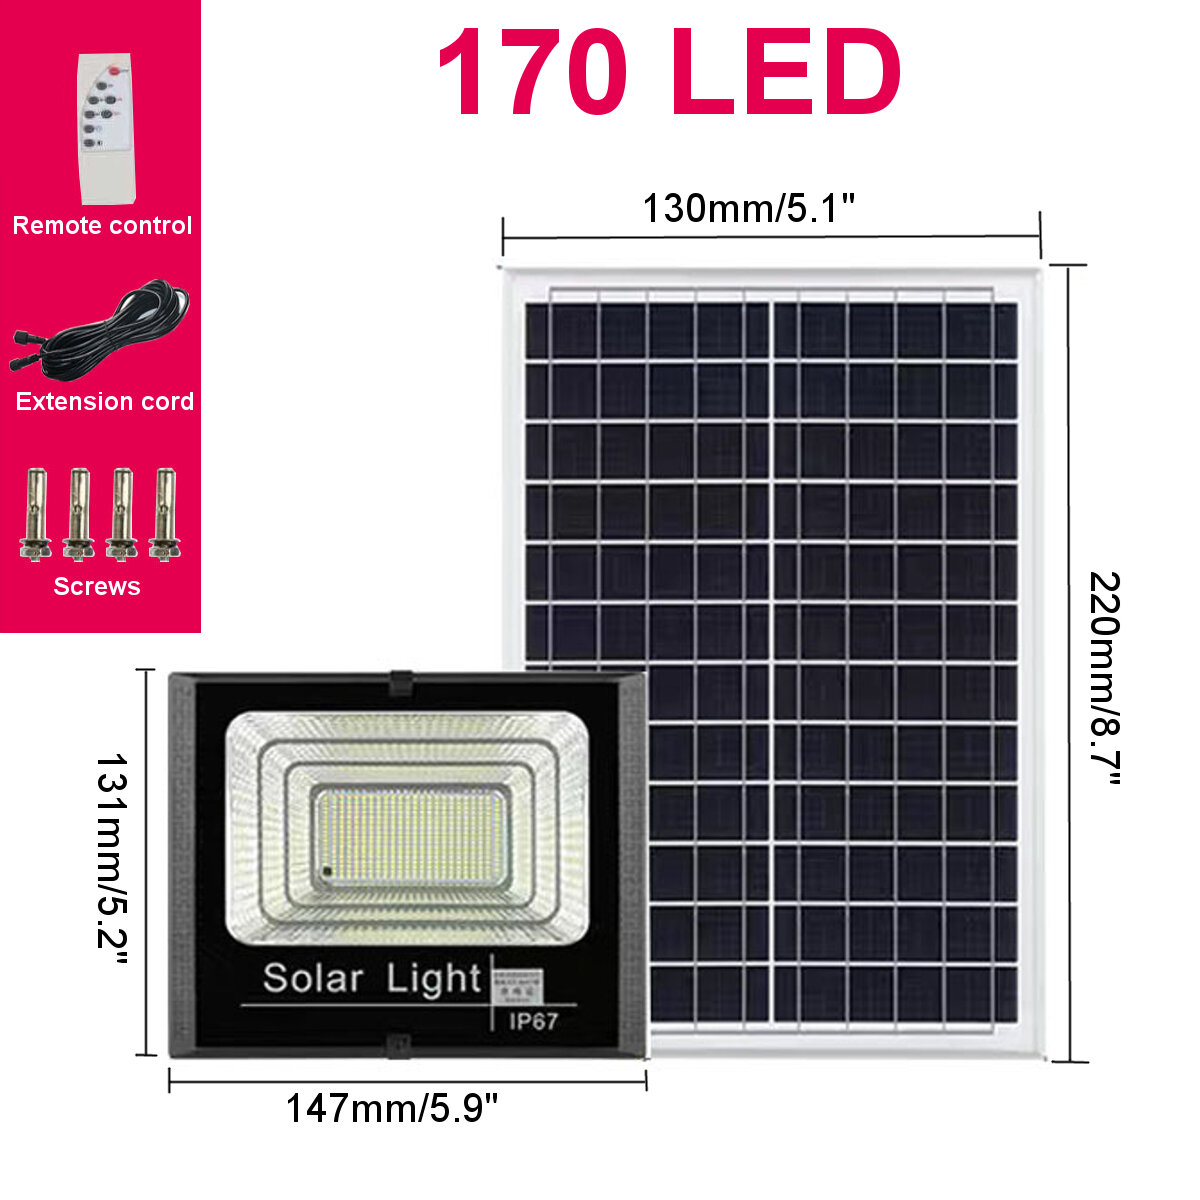 best price,170led,solar,wall,light,discount